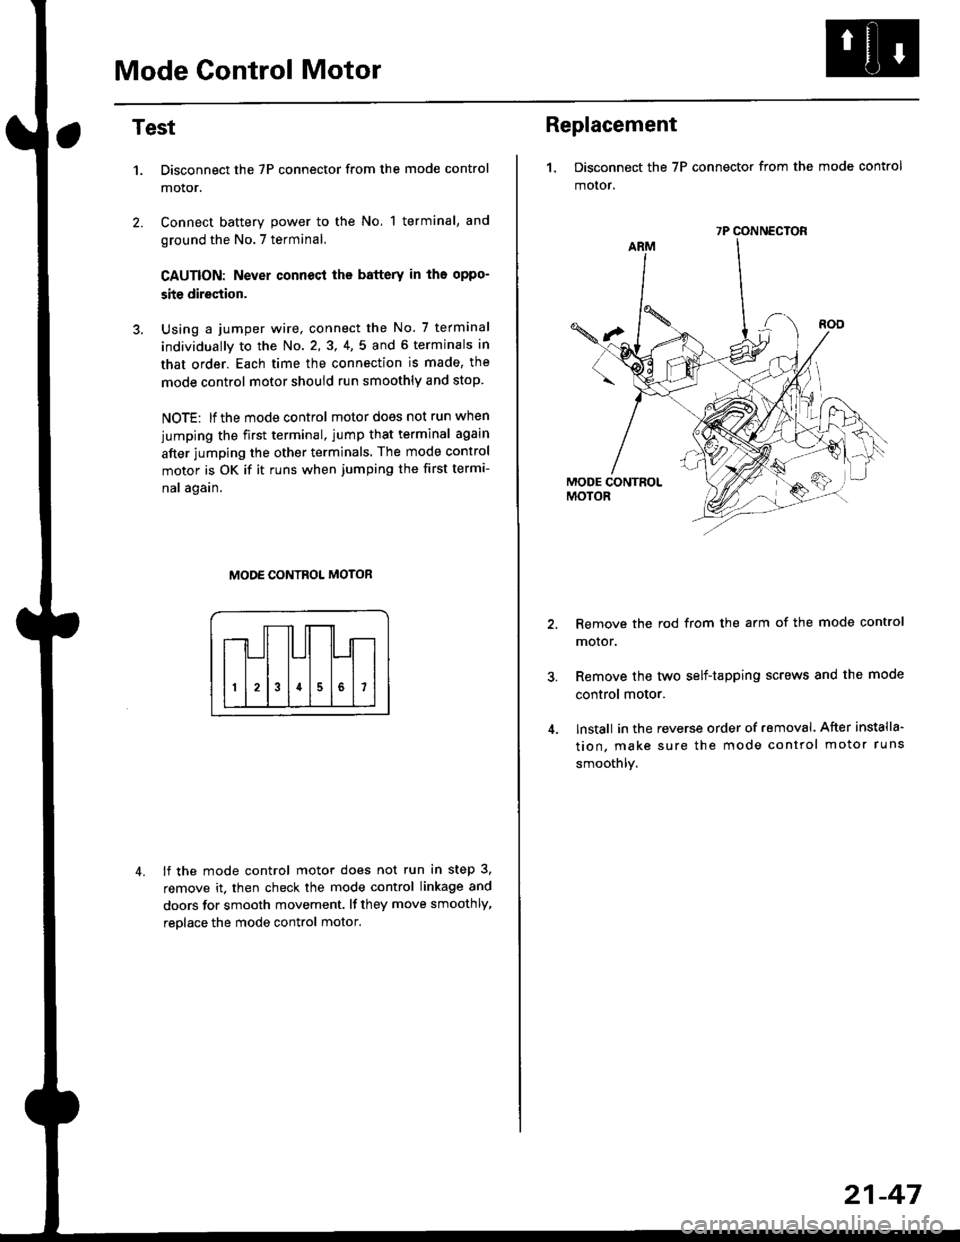 HONDA CIVIC 1999 6.G Workshop Manual Mode Control Motor
2.
Test
1.
4.
Disconnect the 7P connector from the mode control
motor.
Connect battery power to the No, 1 terminal, and
ground the No.7 terminal,
CAUTION: Never connecl the battery 